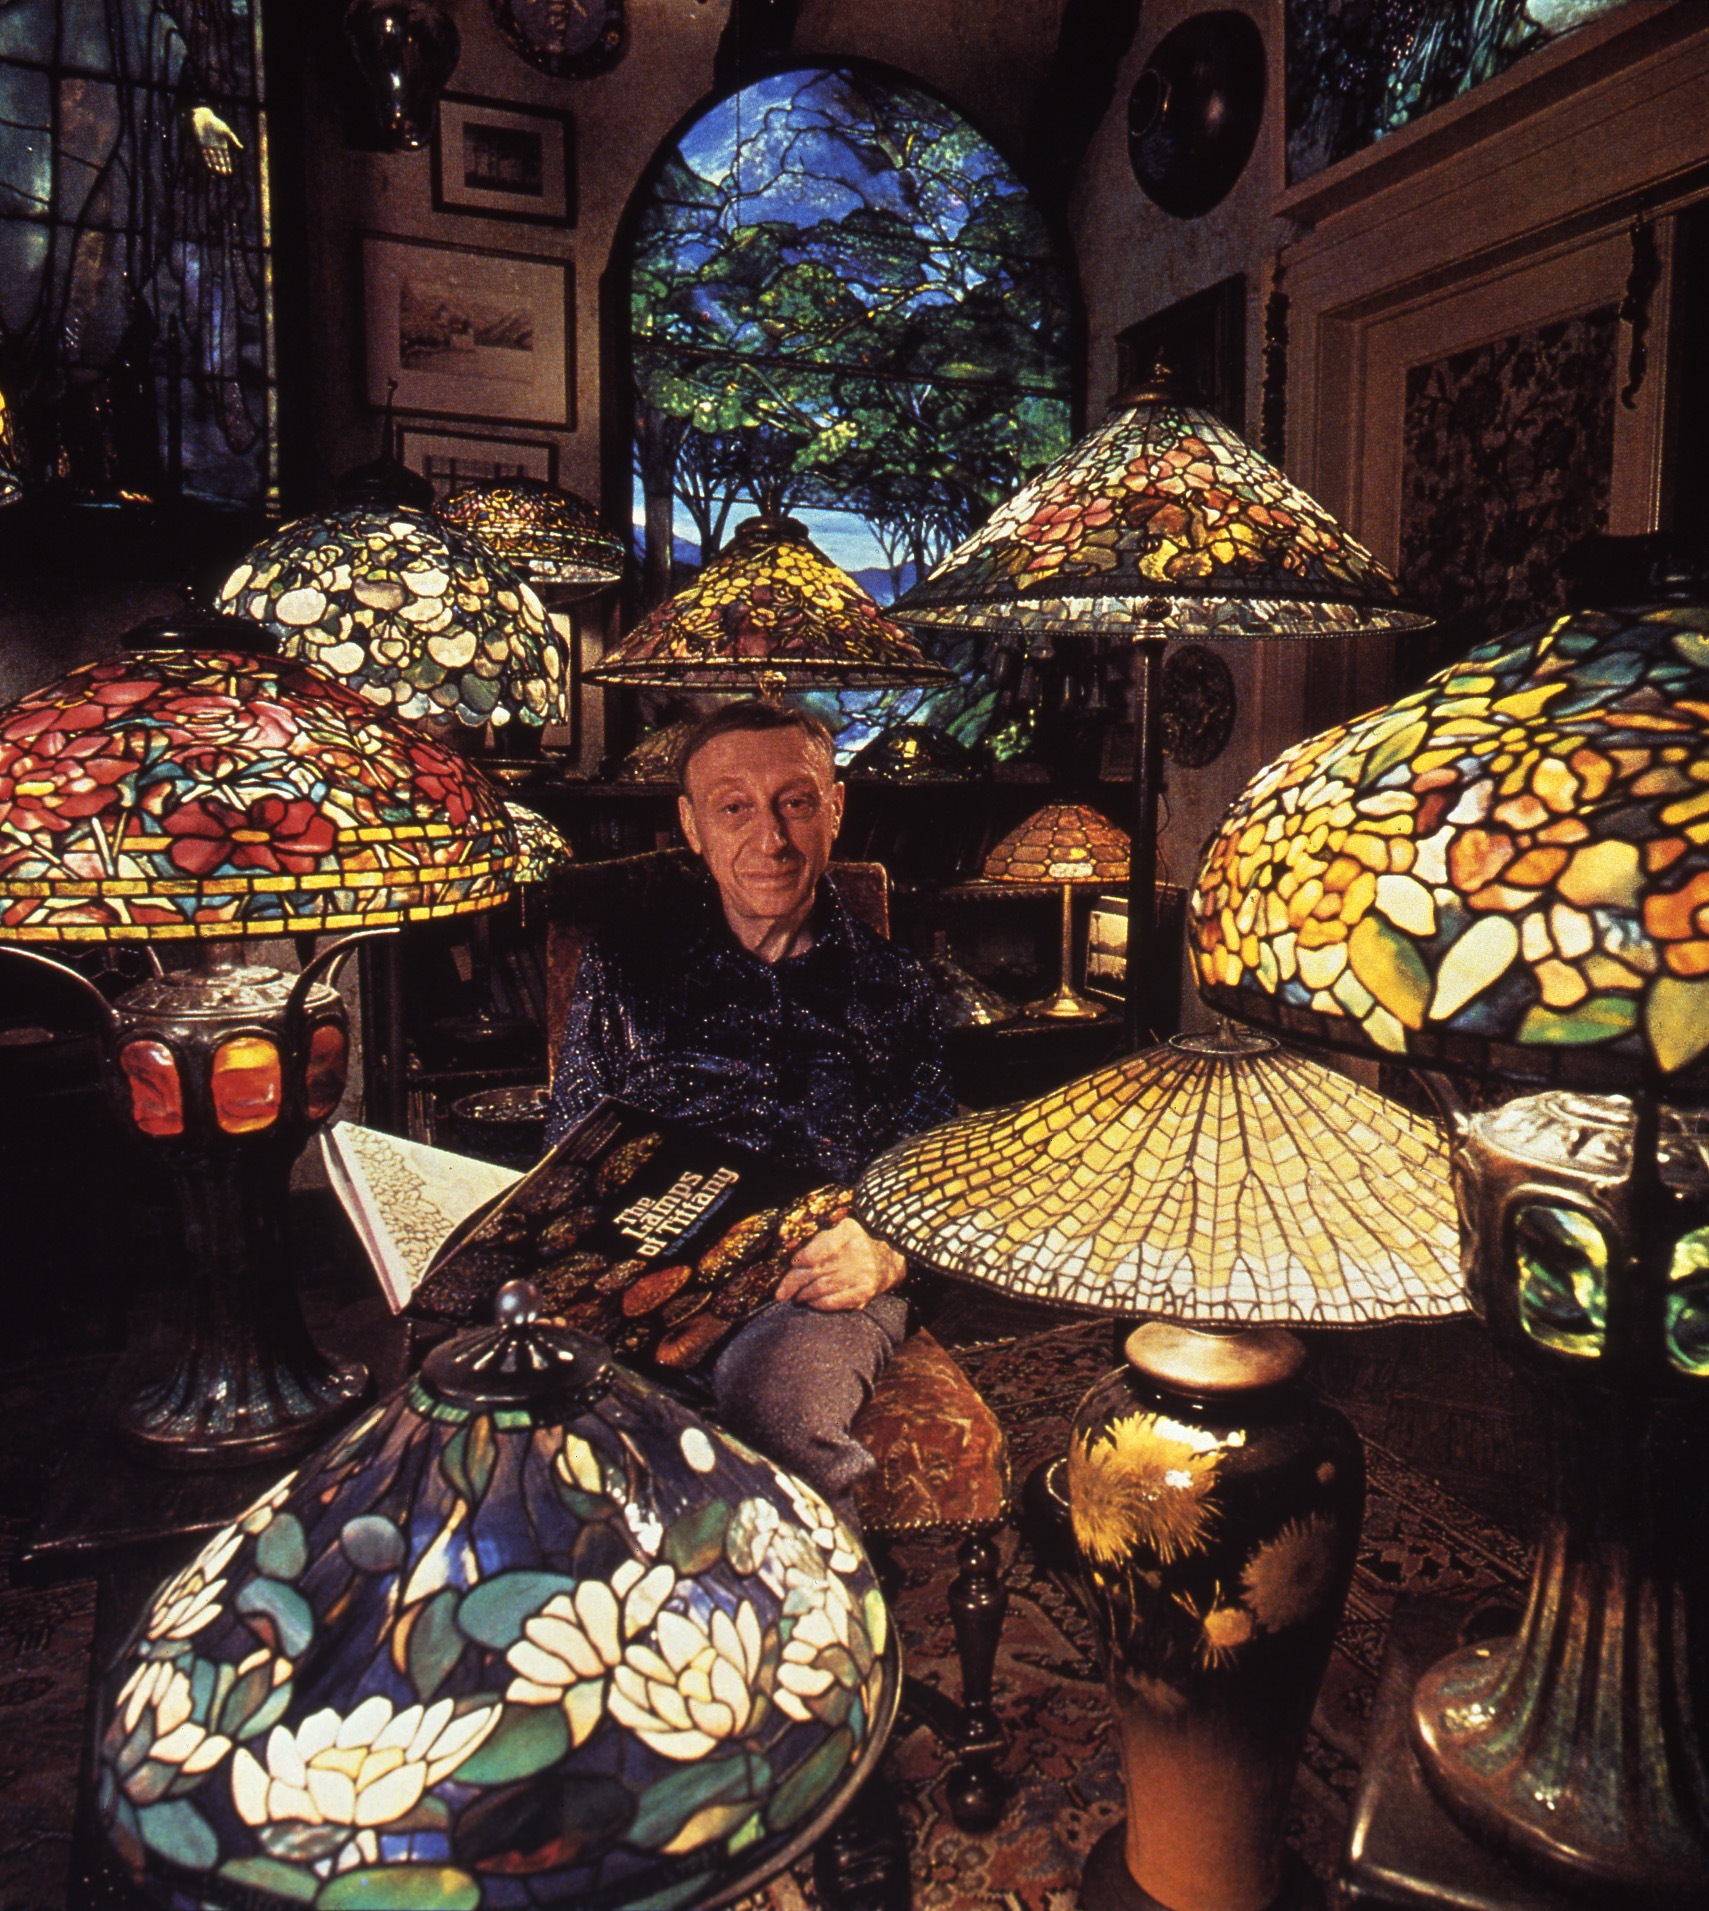 Dr. Egon Neustadt sitting in a brown, cushioned chair. He is wearing a blue button up and gray slacks. His face is framed and lit up by a sea of glass lamps with different, colorful, mosaic patterns. Behind him is a large, blue and green, stain-glass window of a nature scene.